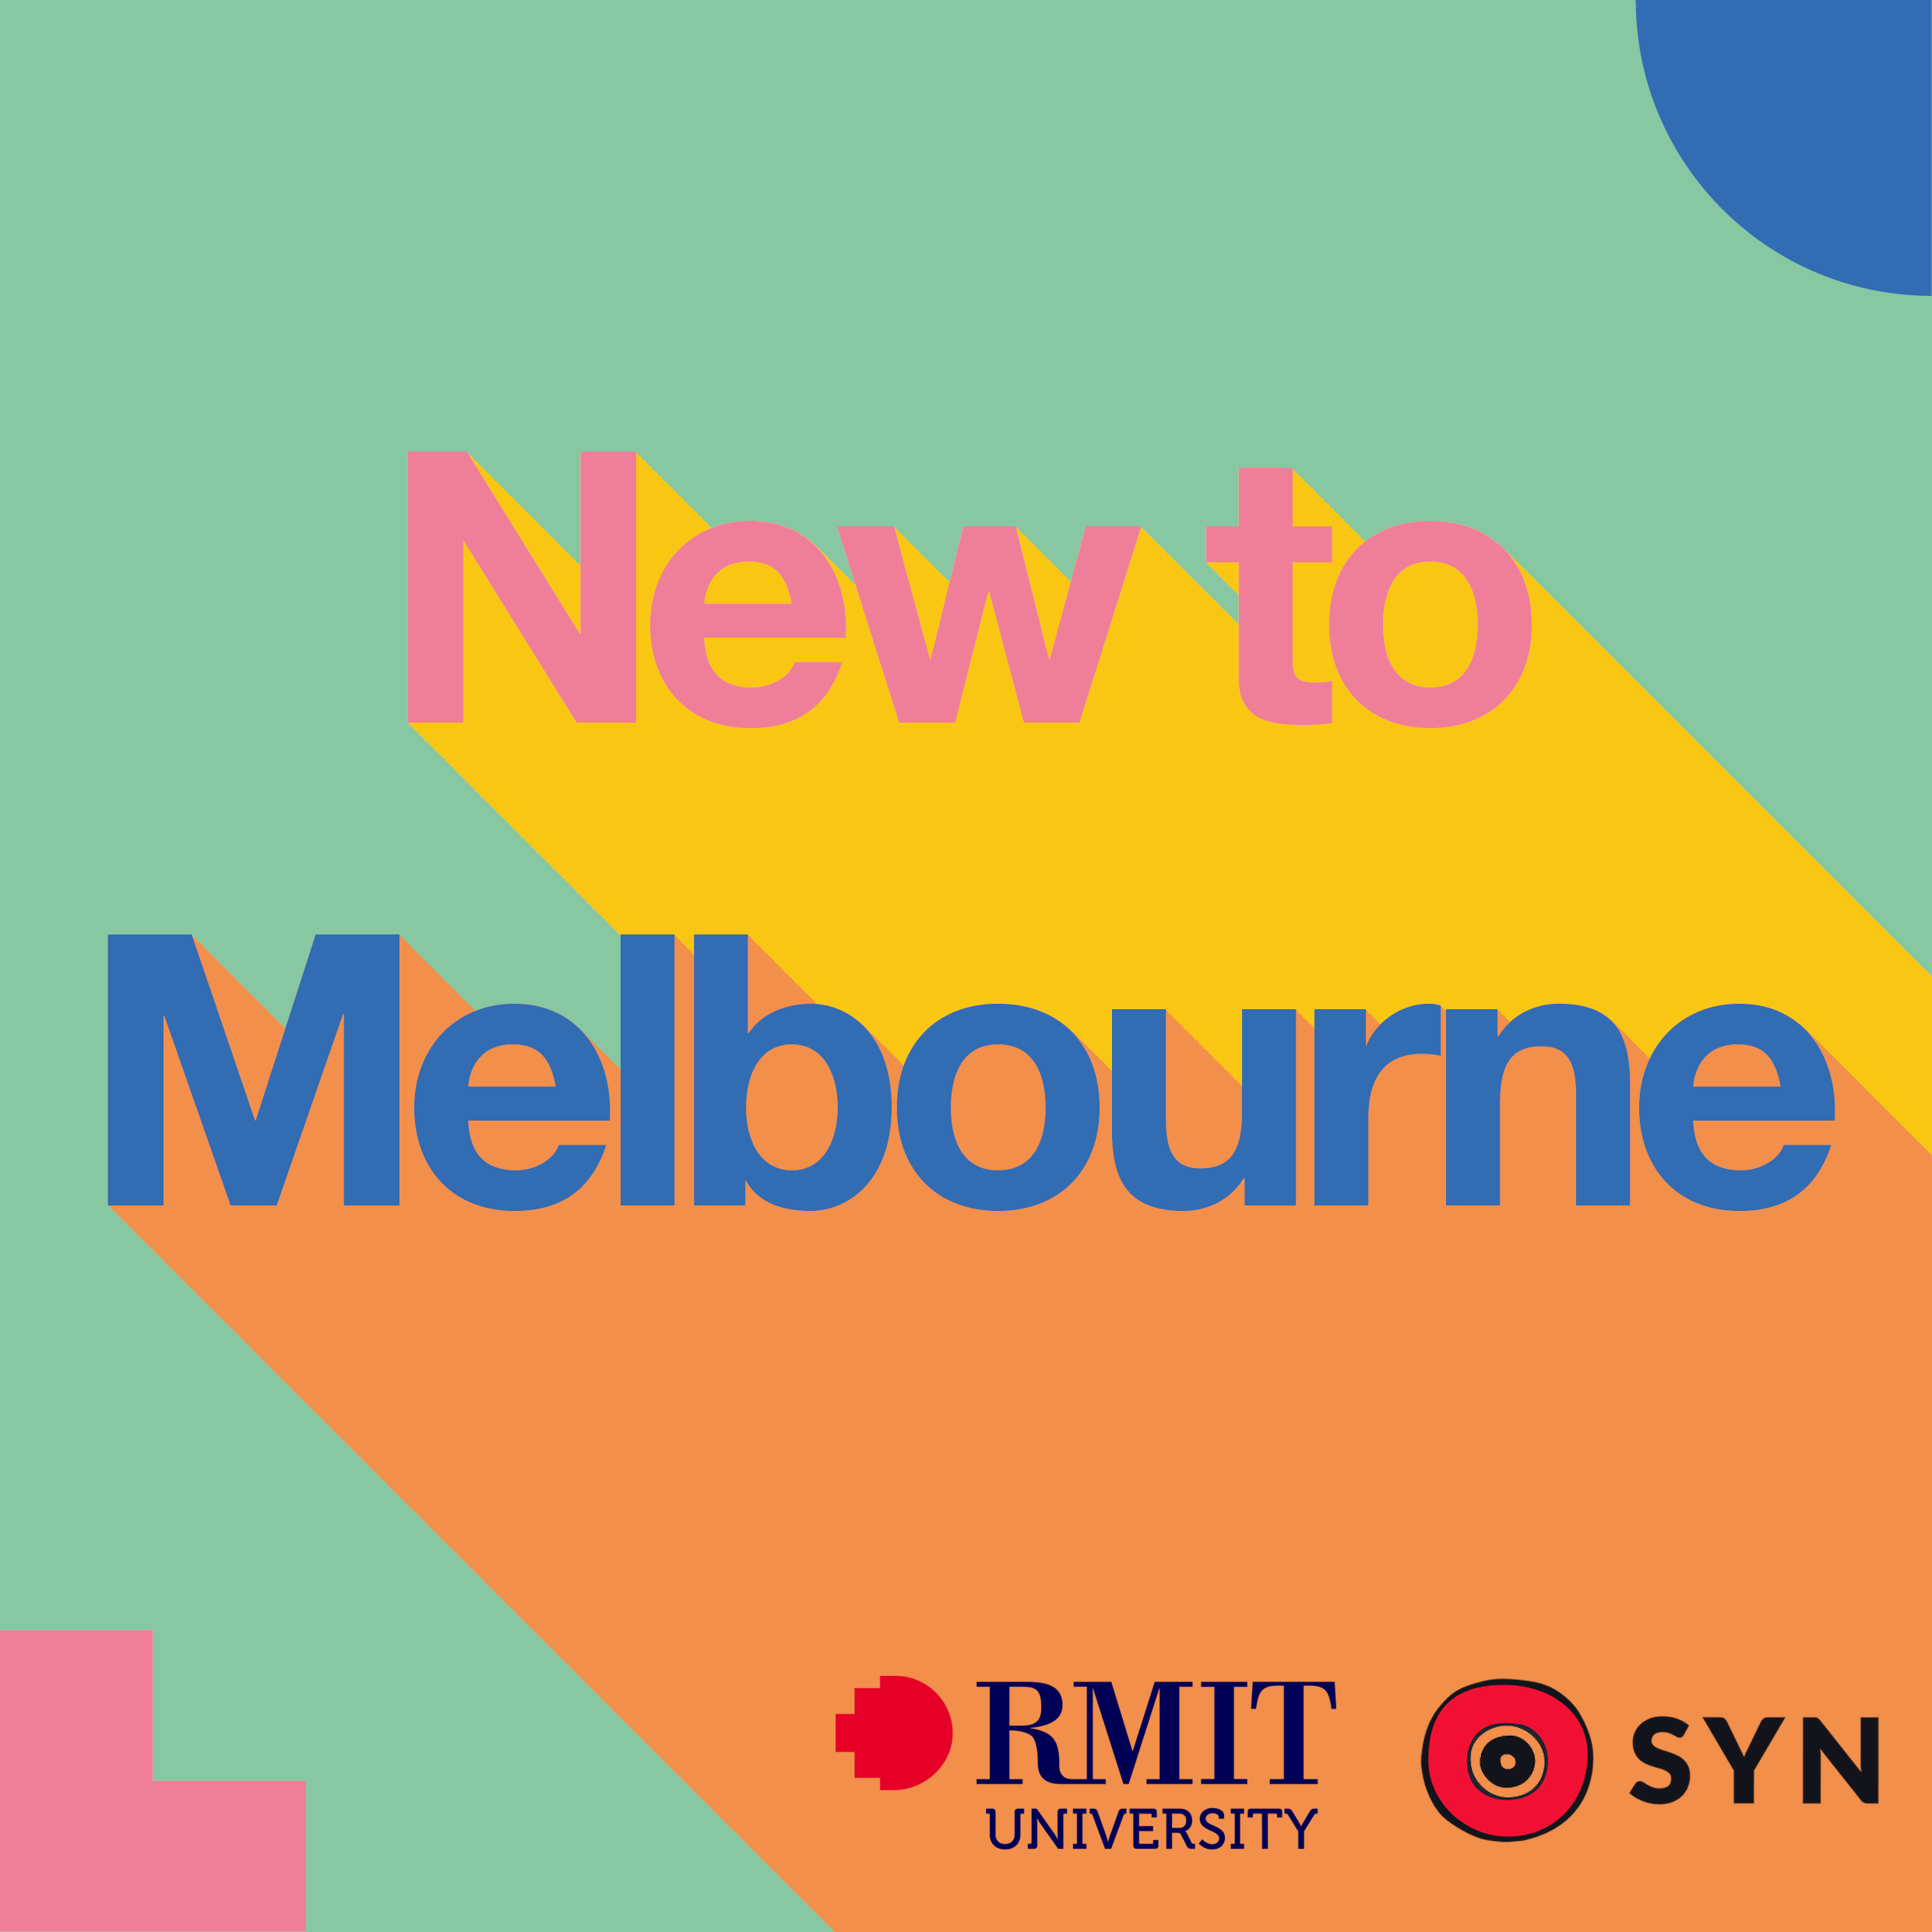 004 - New to Melbourne 'Making Connections and Getting Involved'